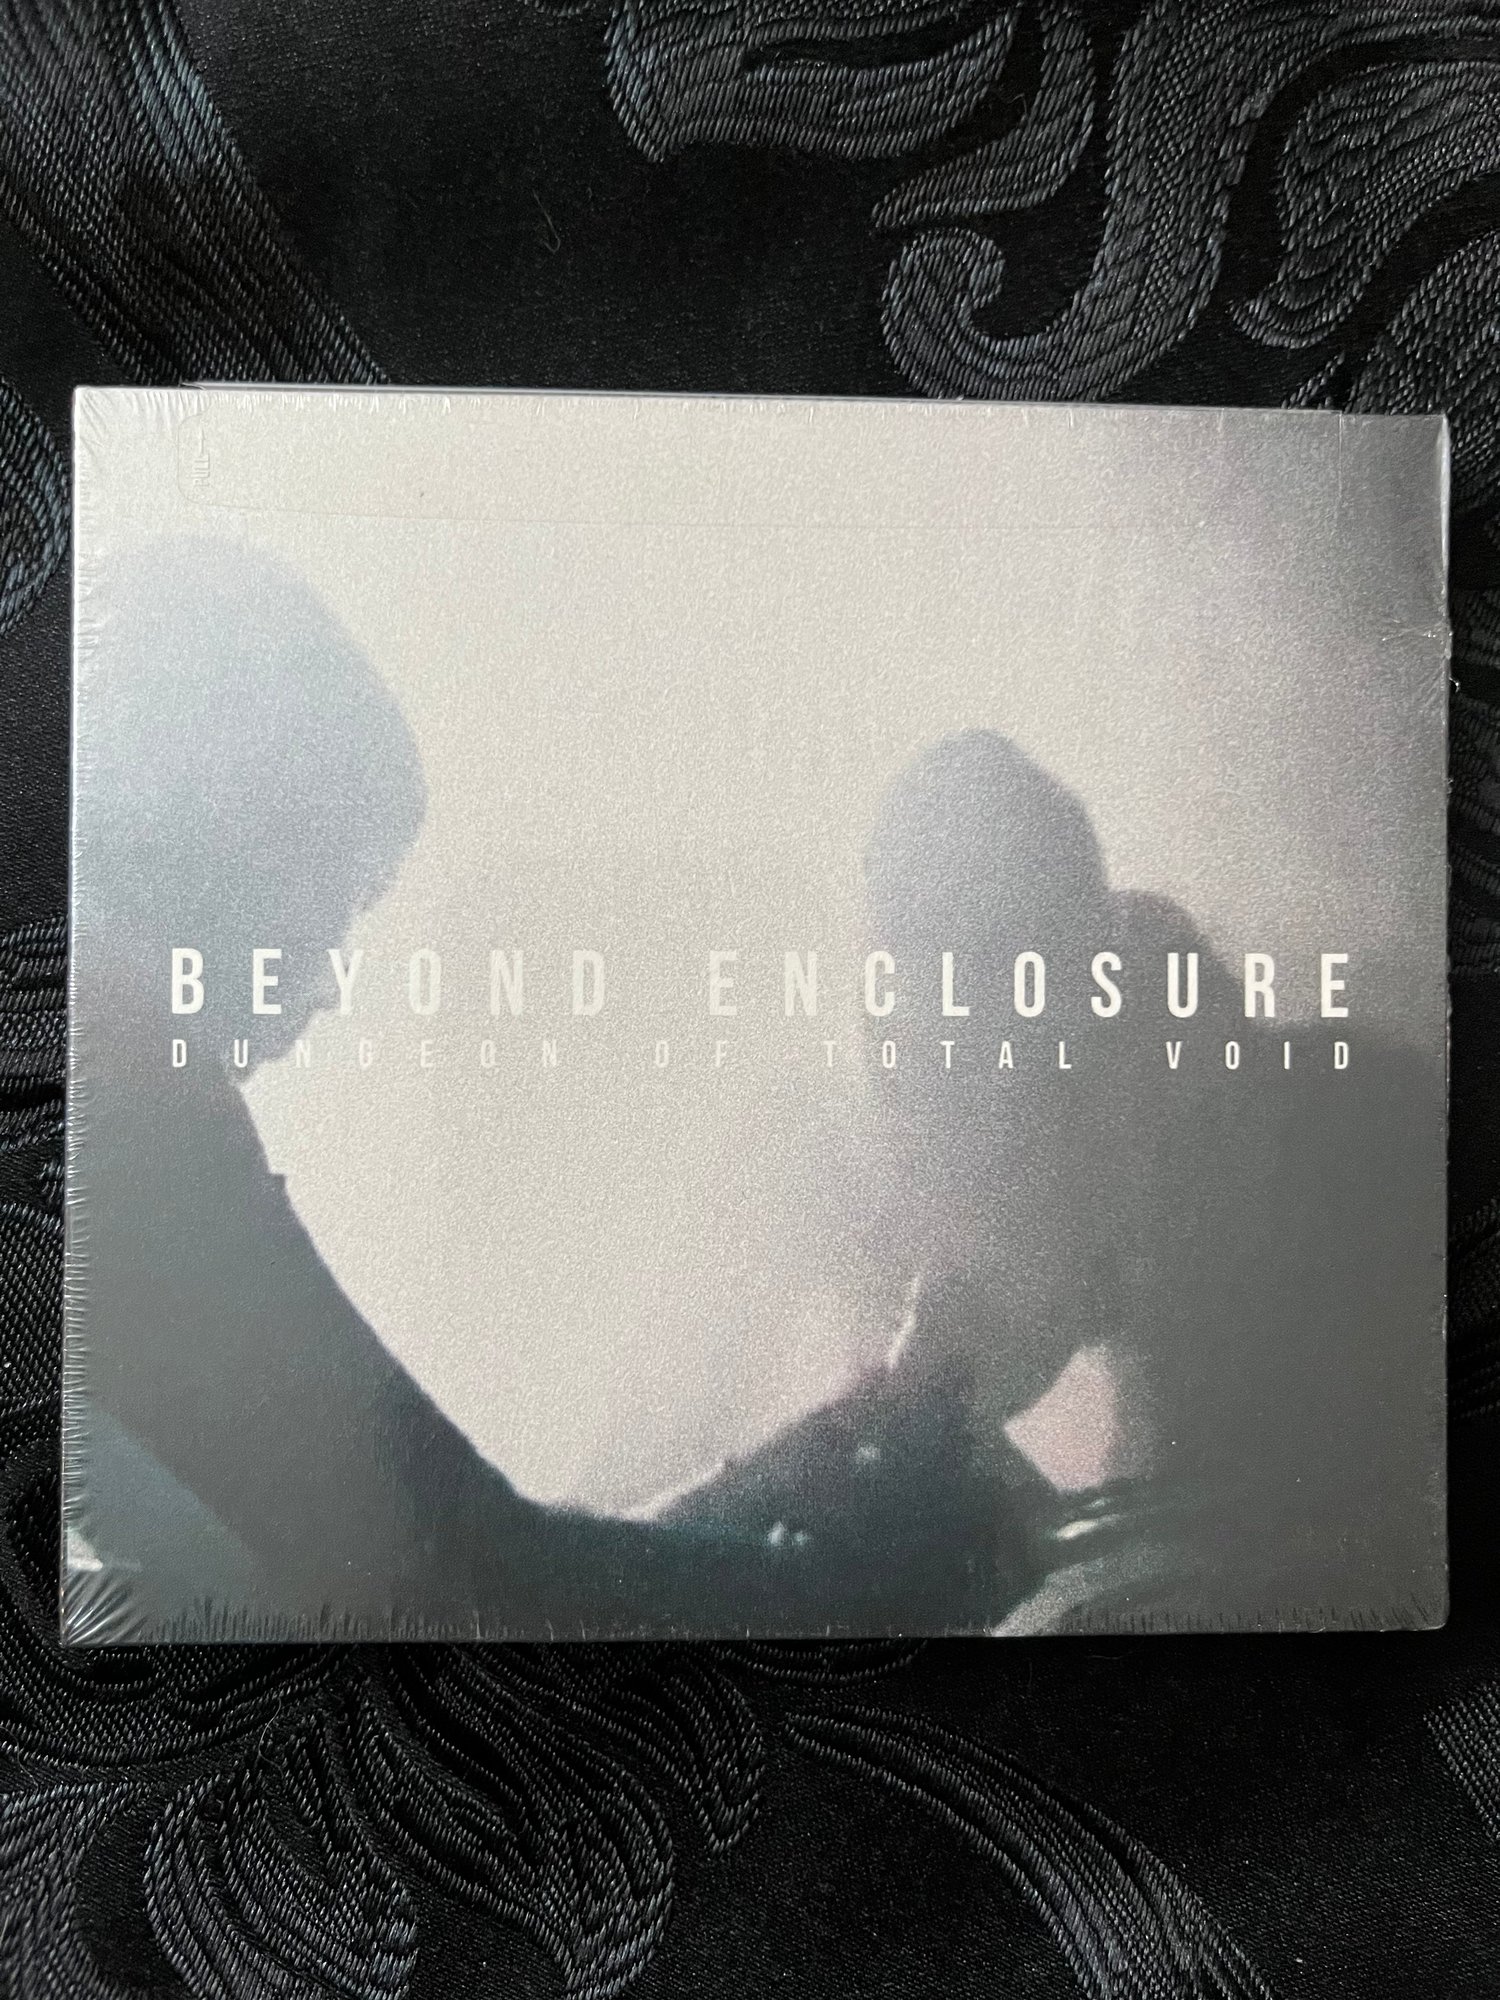 Beyond Enclosure - Dungeon of Total Void CD (Malignant)